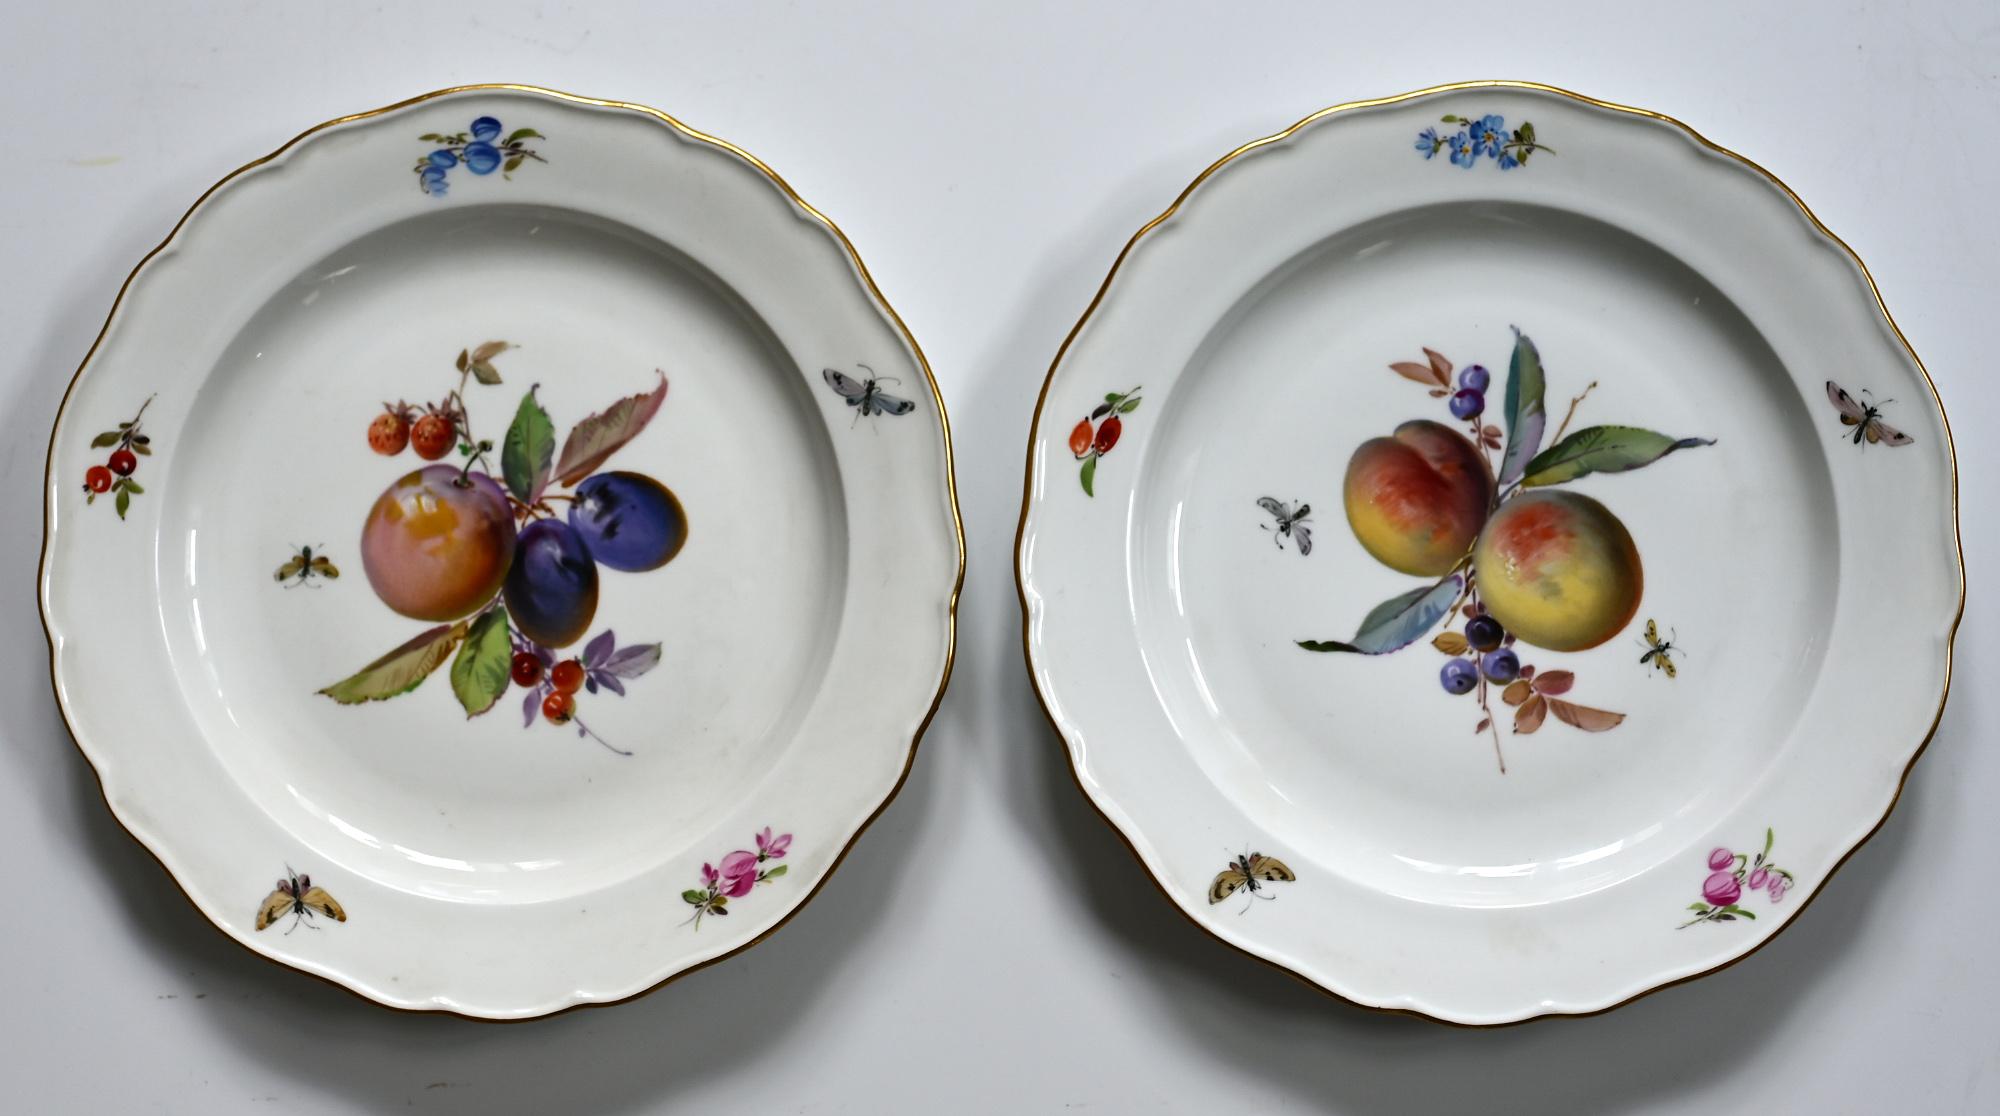 Set of 12 Meissen Plates with Fruits, Insects and Flowers 19.Jhdt Porcelain 2